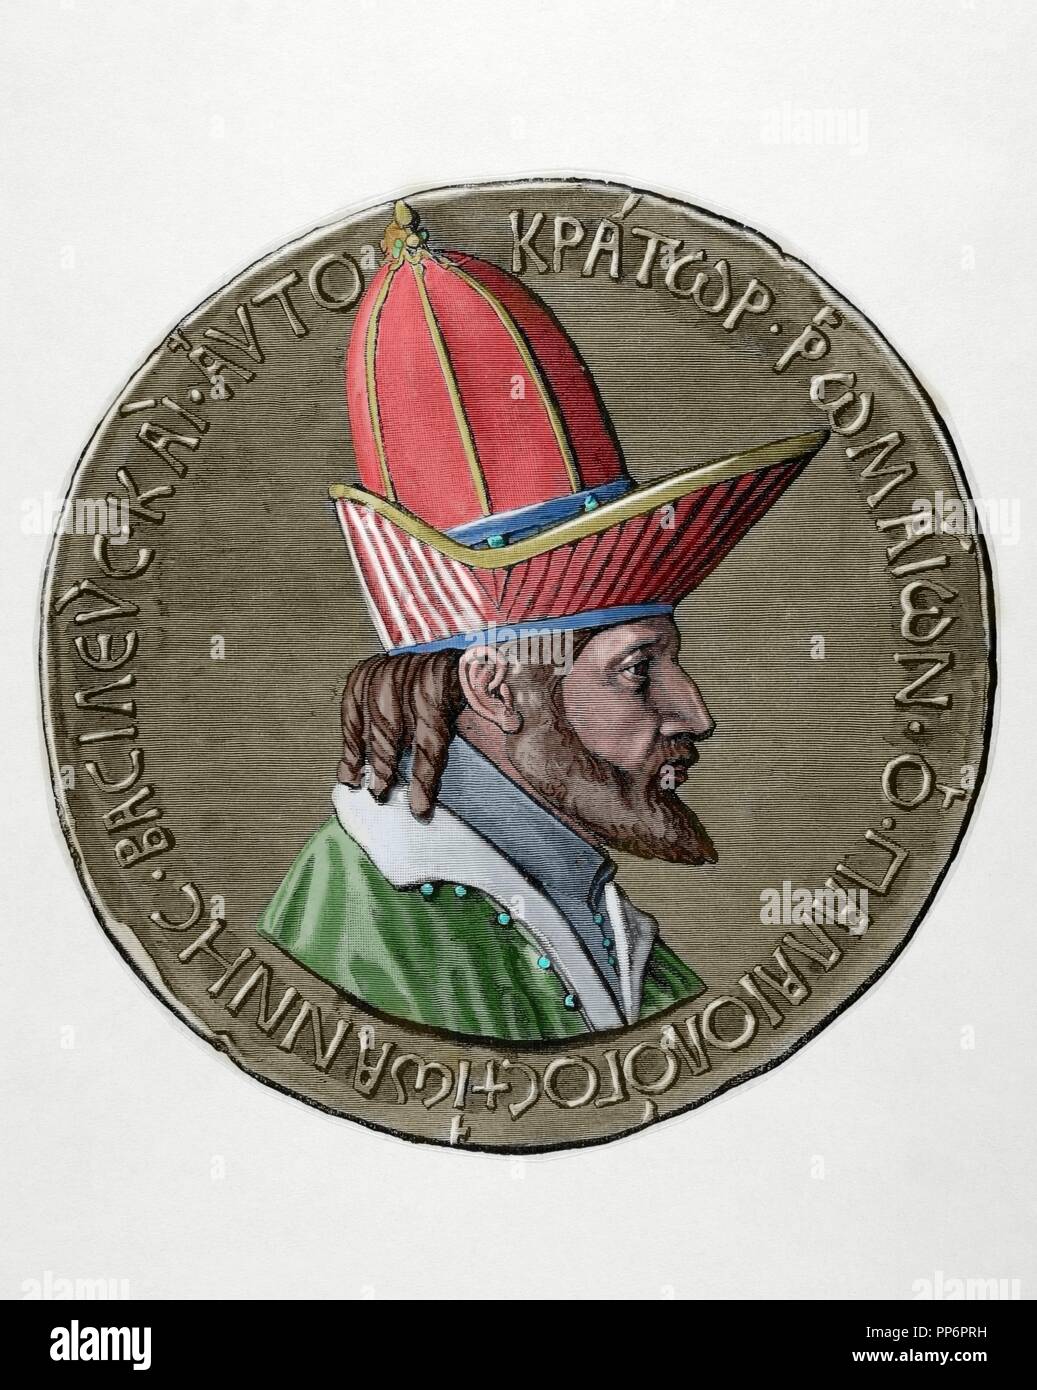 John VIII Palaiologos or Palaeologus (1392-1448). Penultimate reigning Byzantine Emperor, ruling from 1425 to 1448. Engraving. Colored. Stock Photo